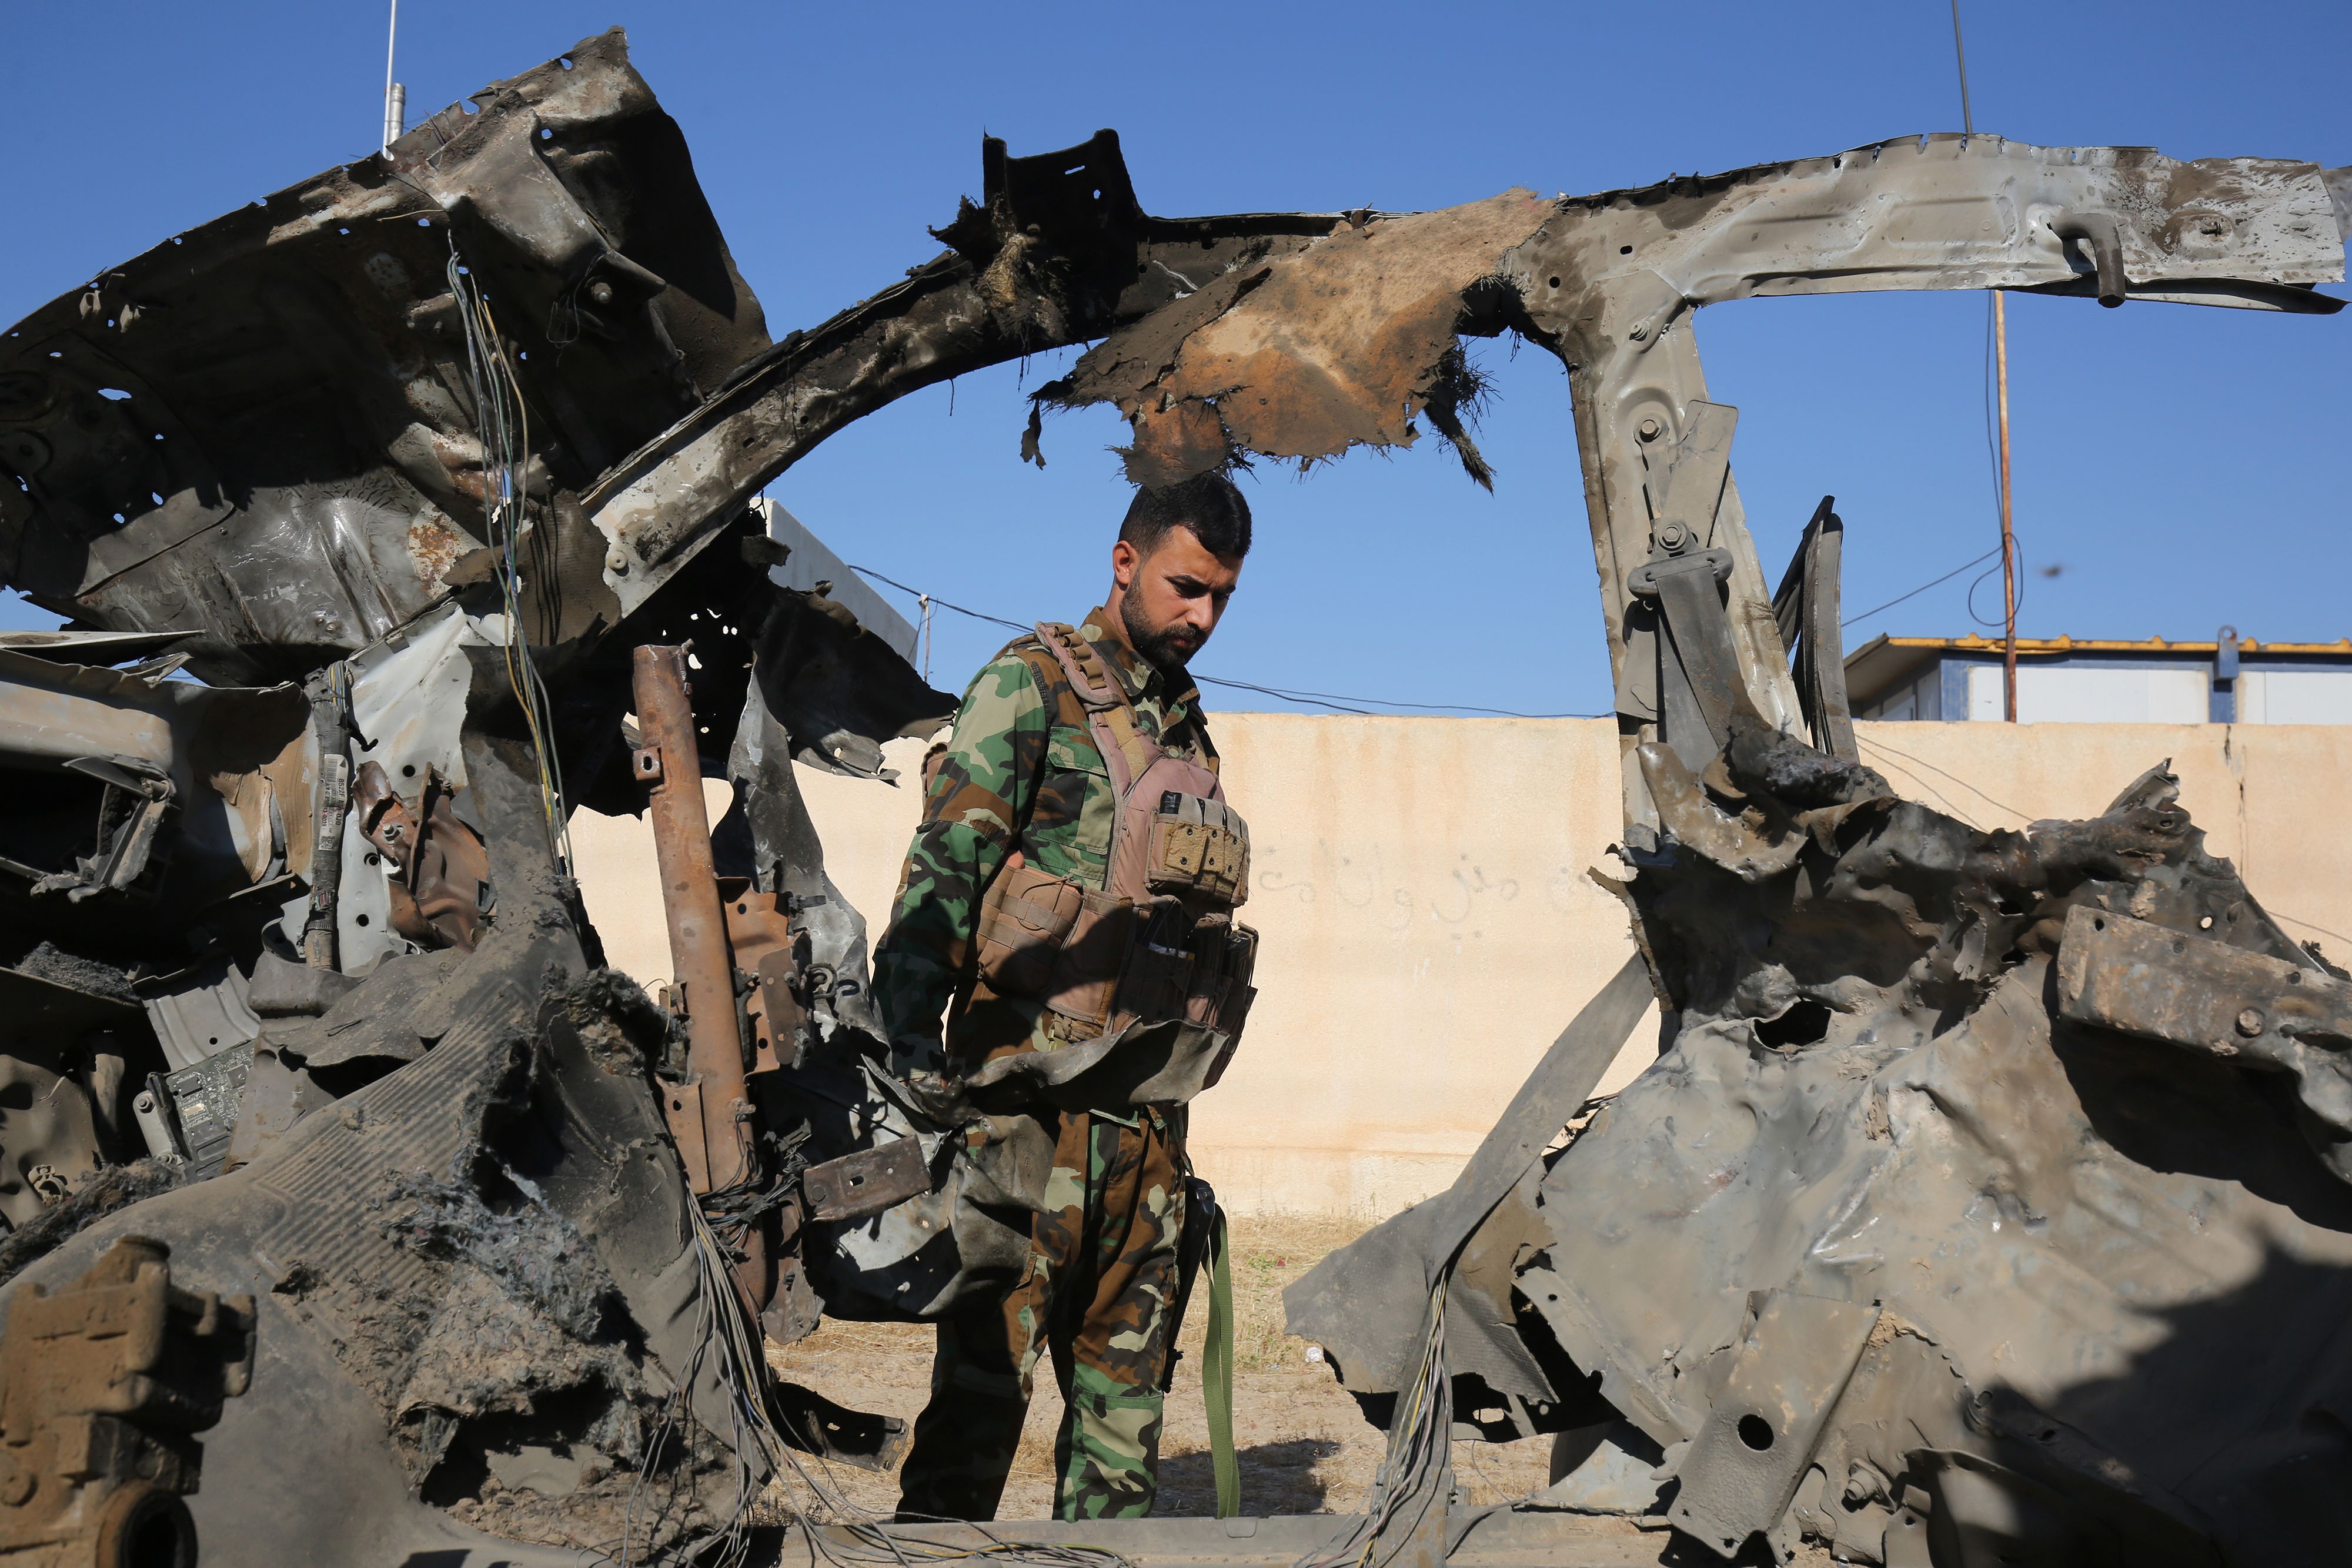 Iraq attempts to combat extremism after escalation of terrorist operations